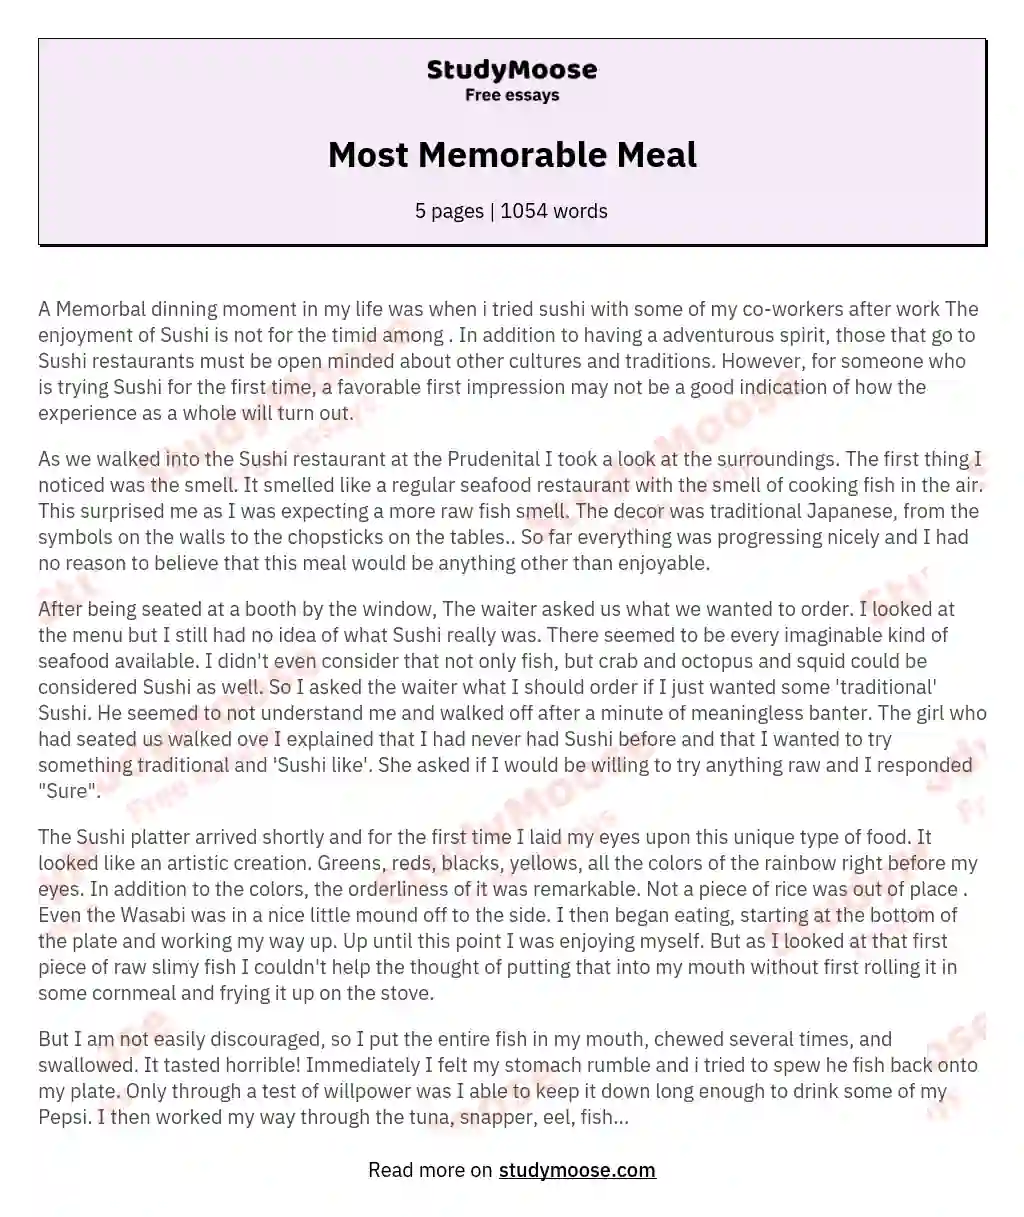 Most Memorable Meal